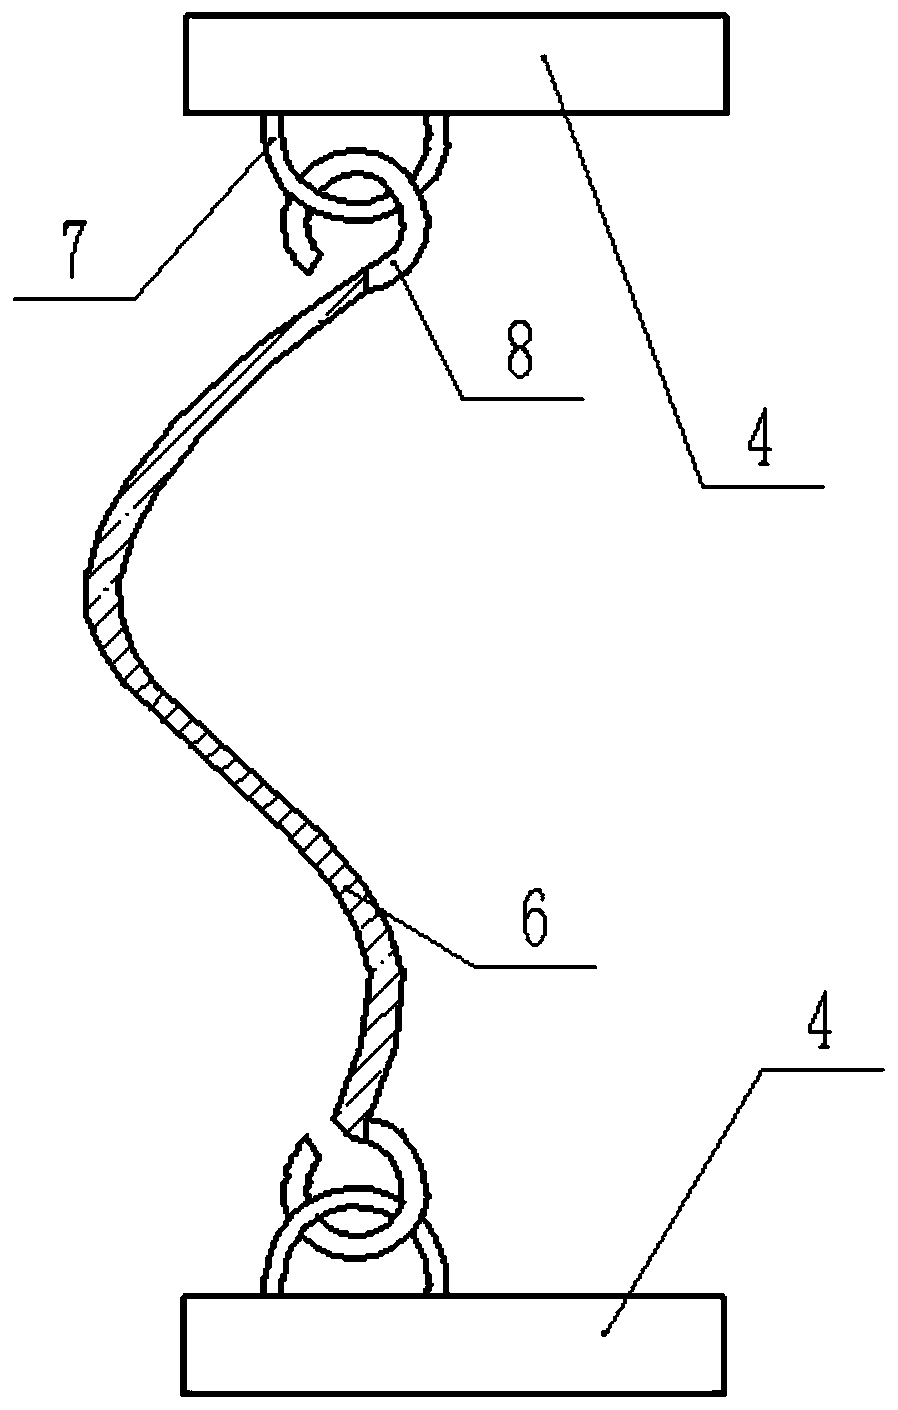 Retaining device for prevention and control of water soil erosion